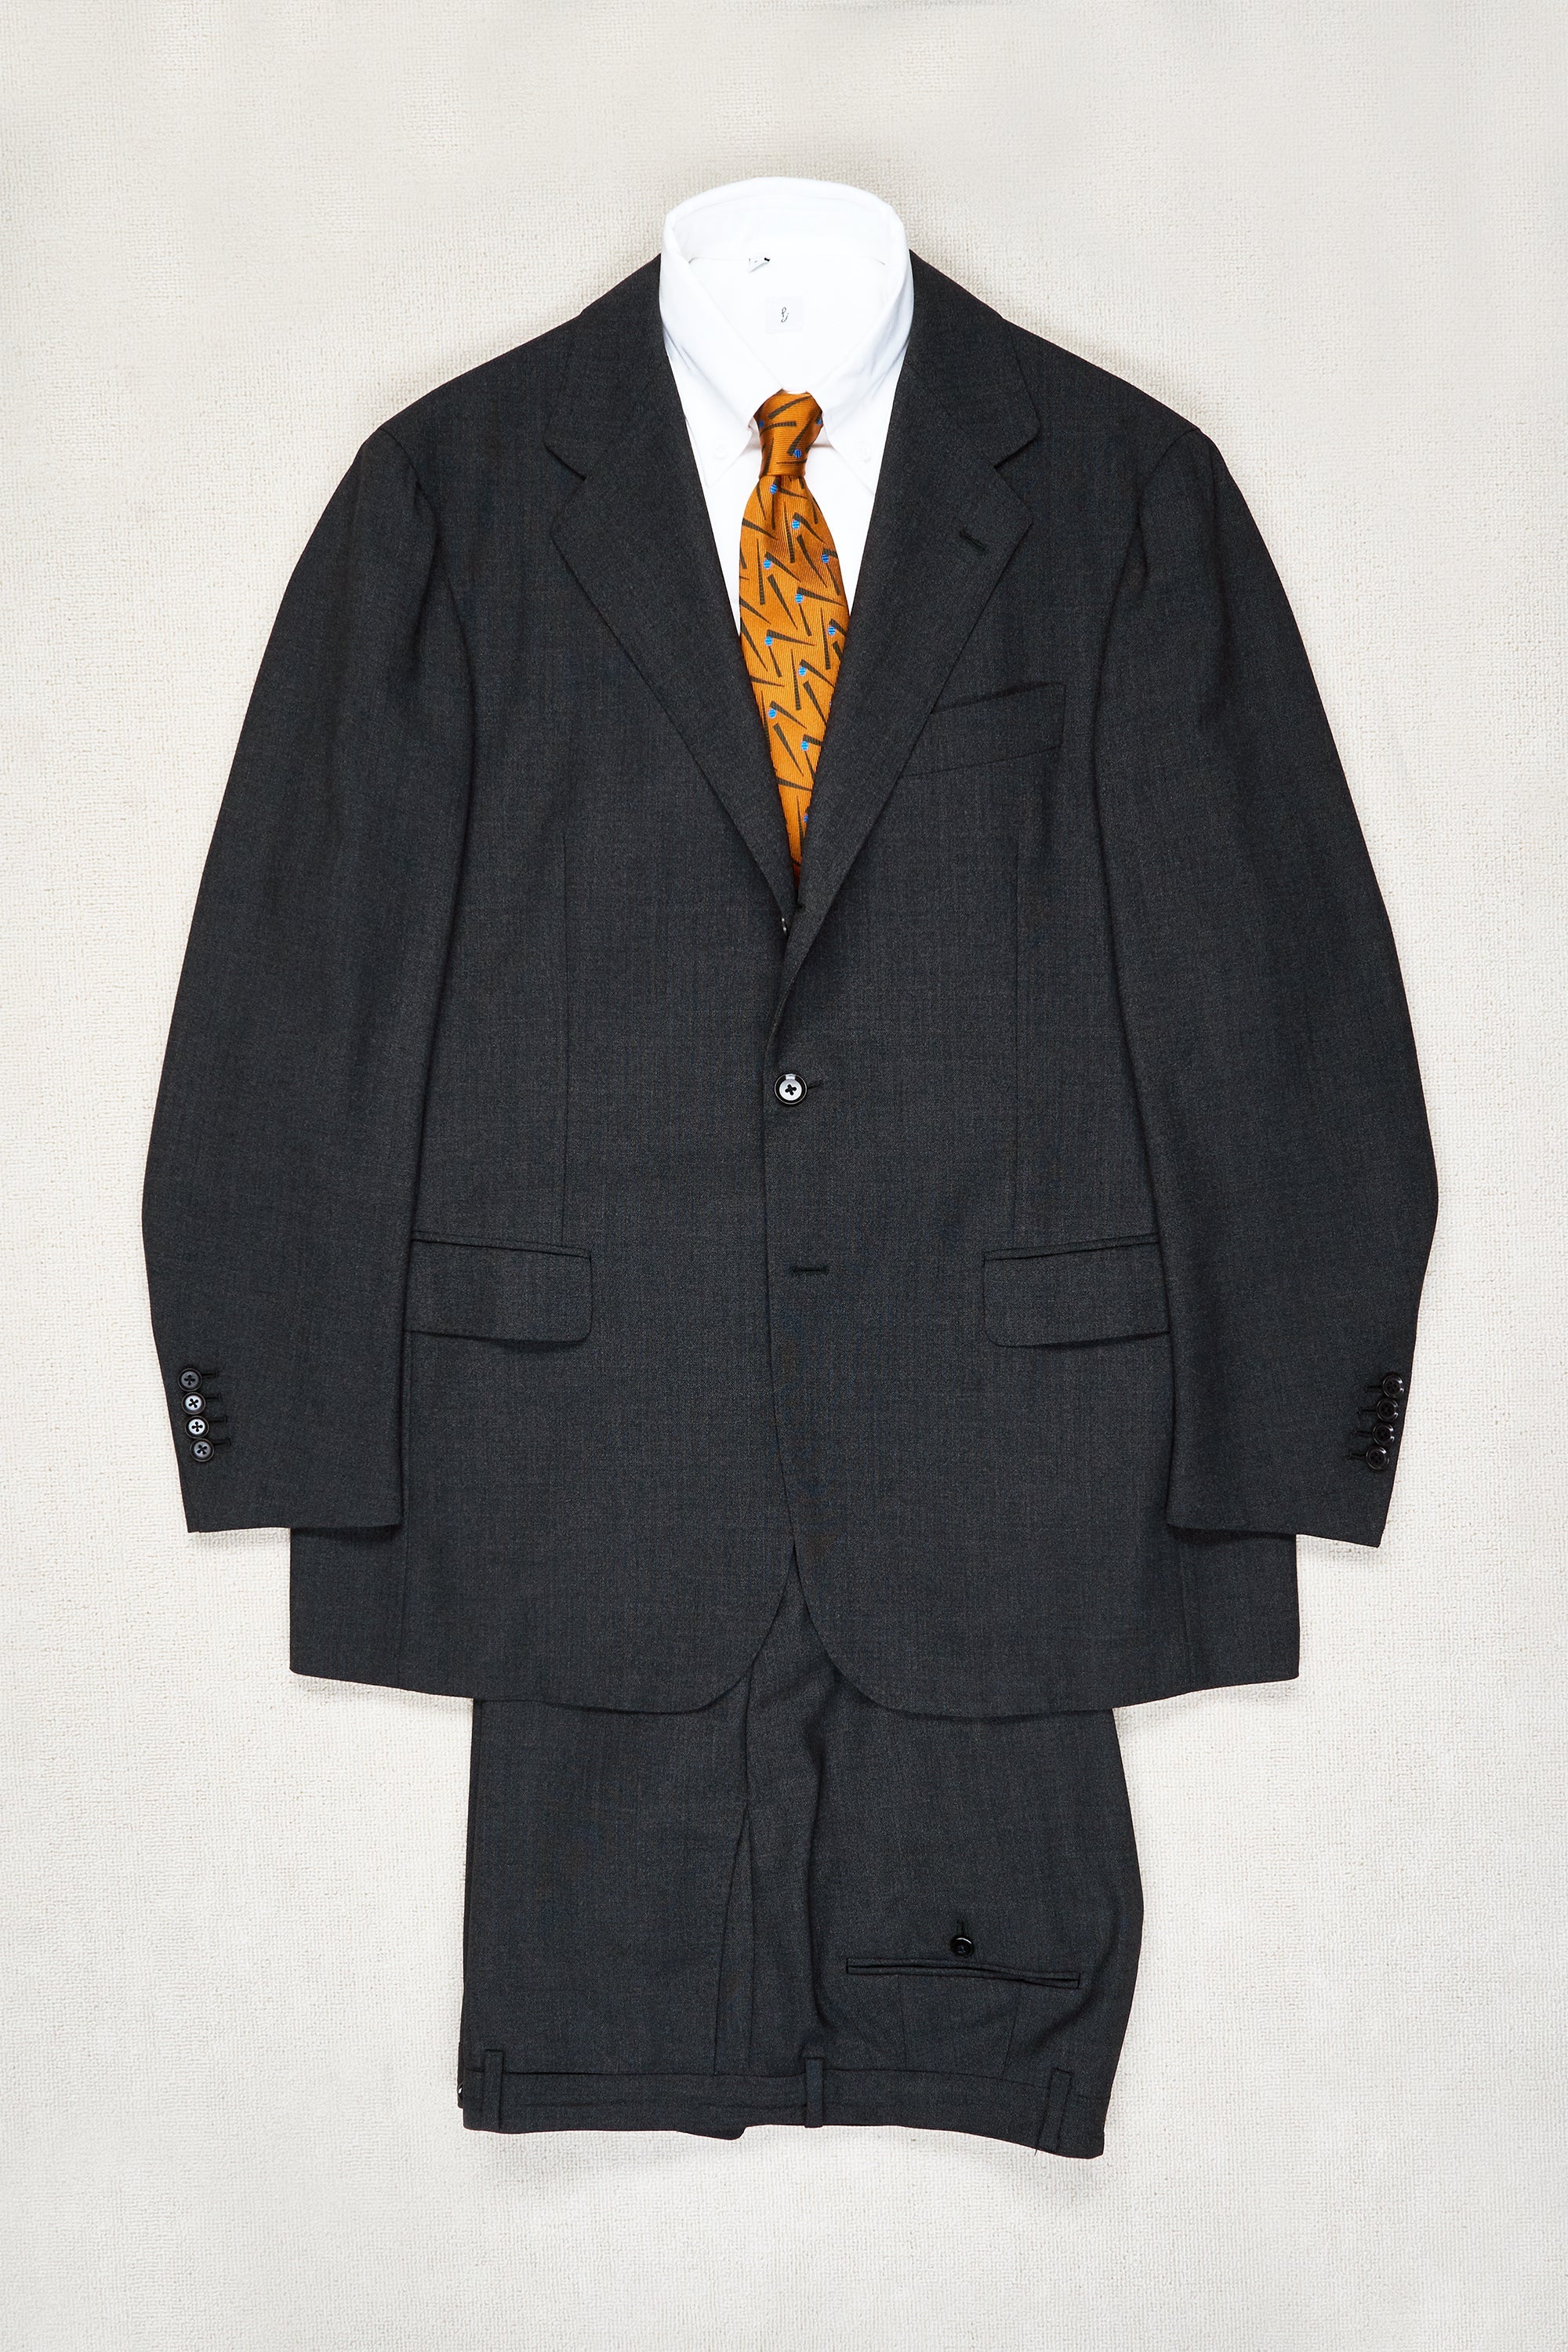 The Armoury by Ring Jacket Model 3 Grey 4-ply Wool Suit